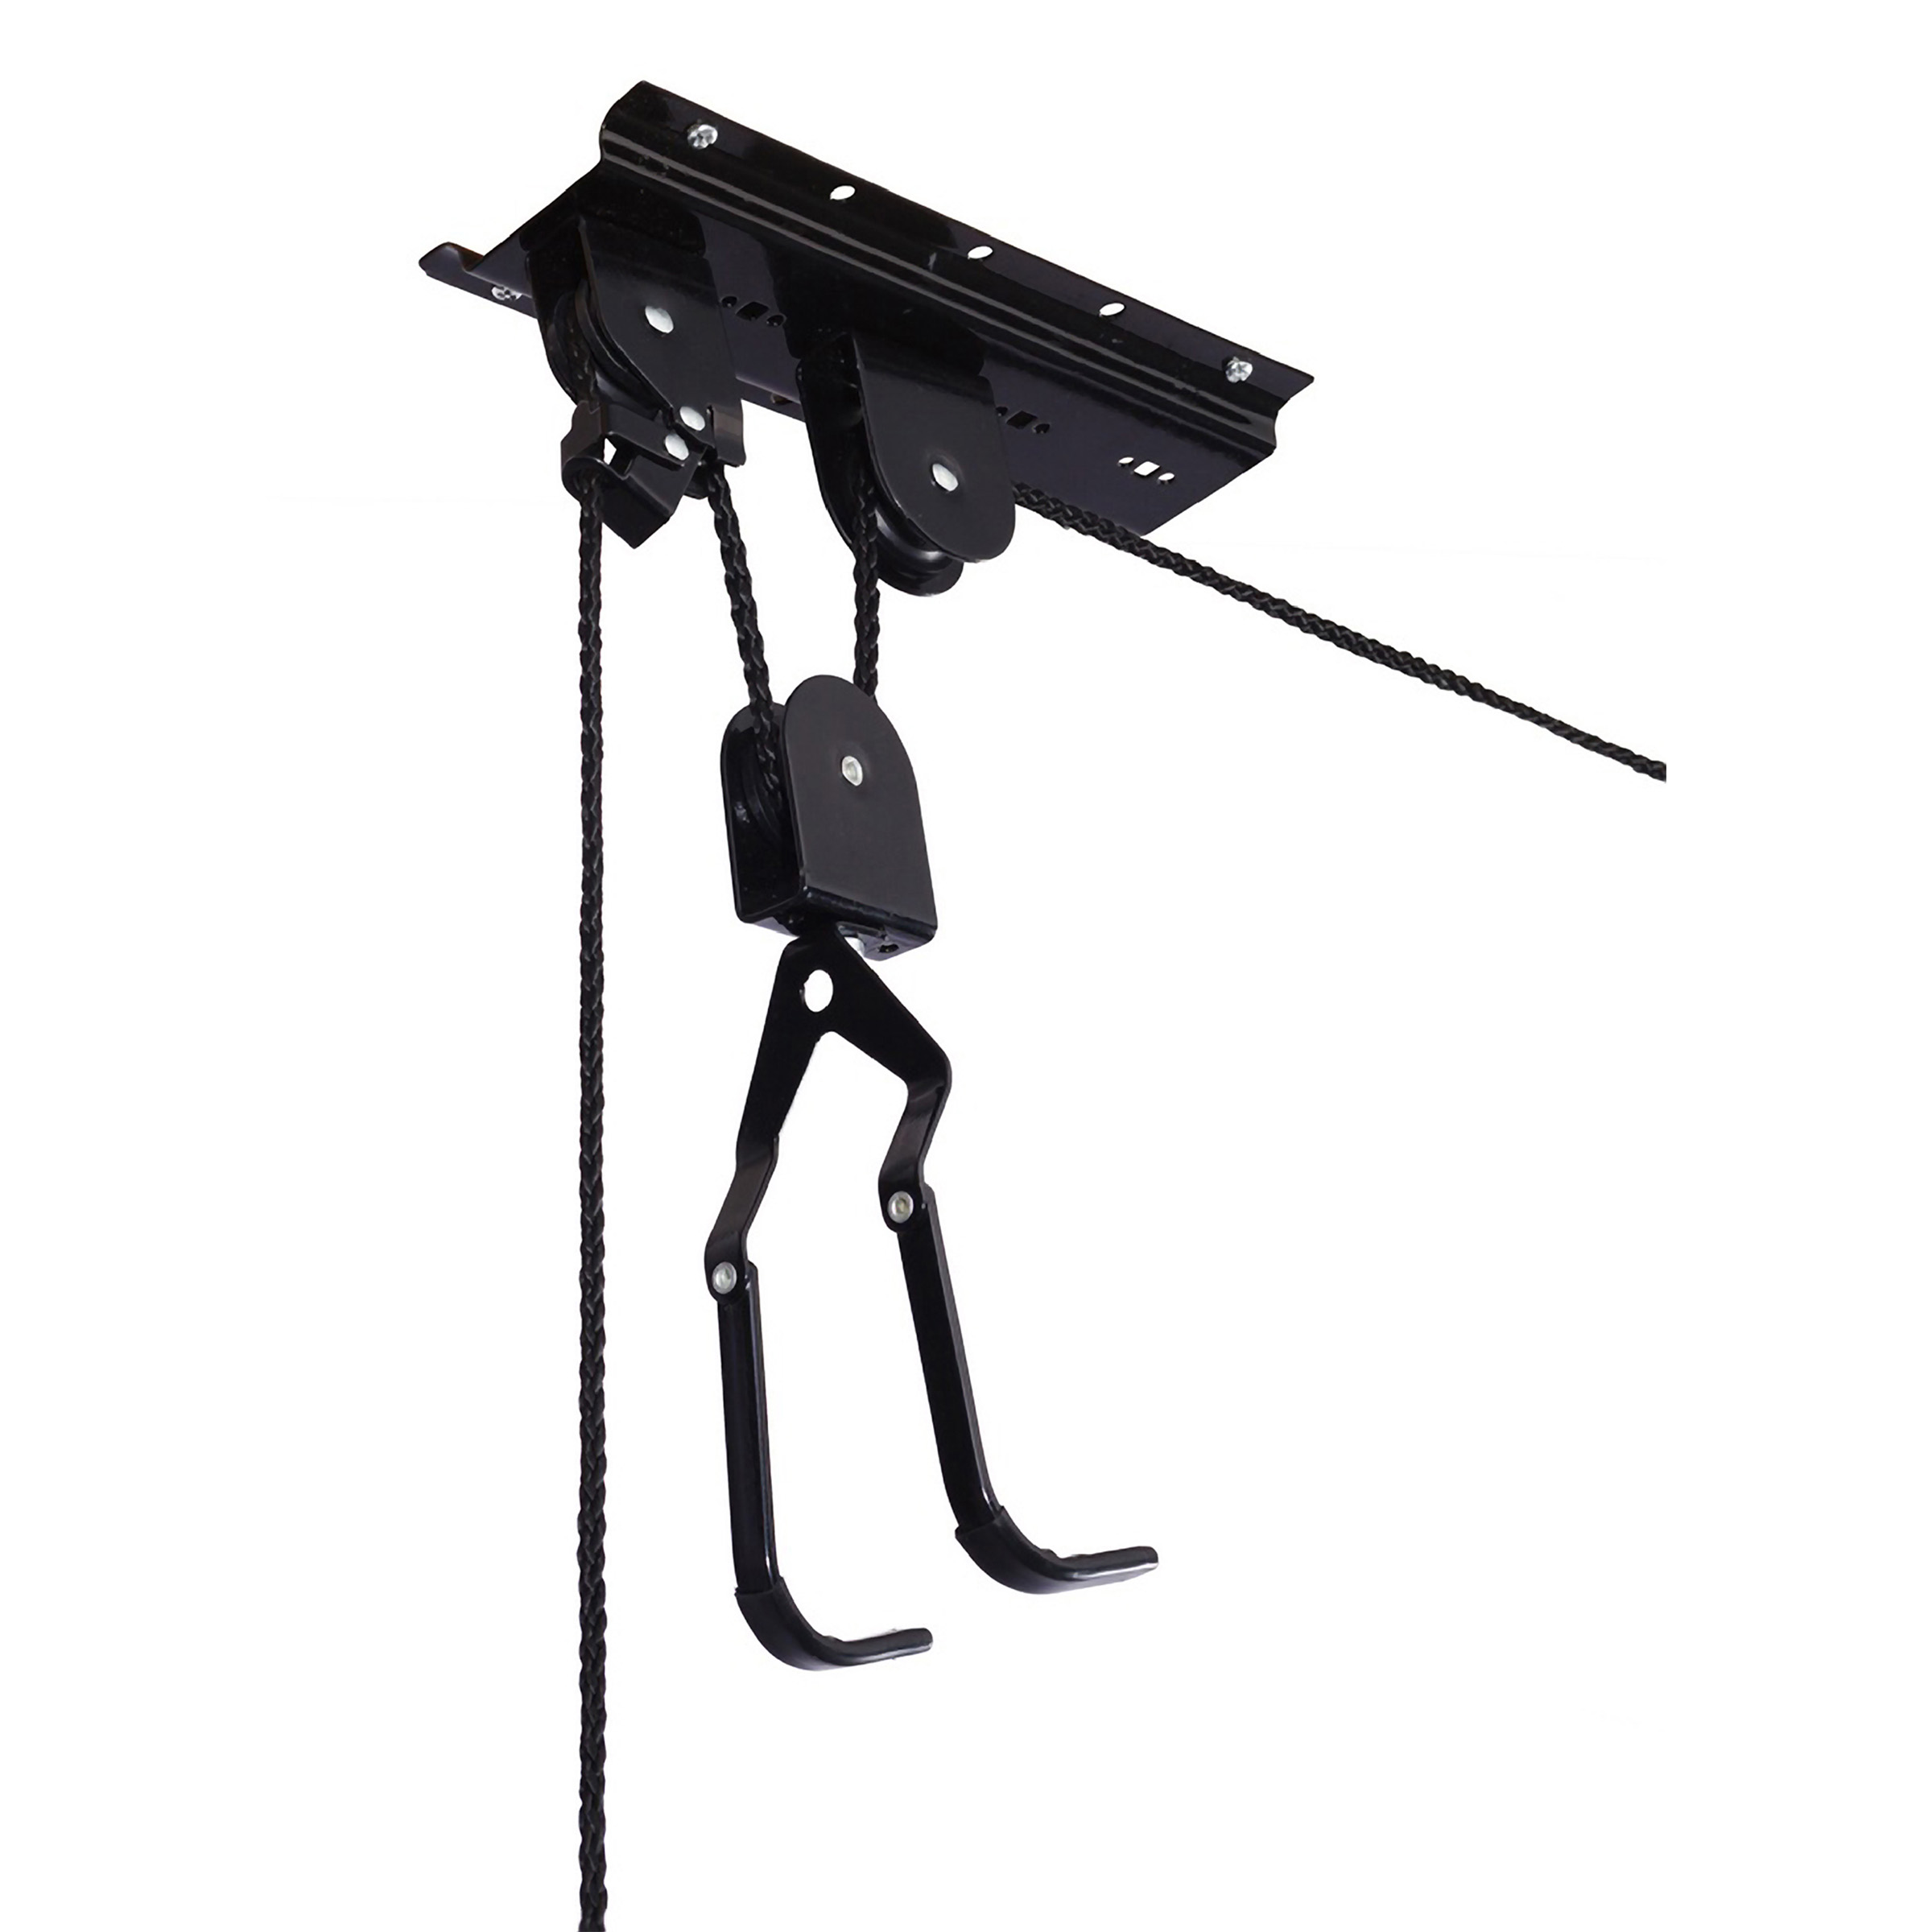 Bike Hanger ? Overhead Hoist Pulley System with 100lb Capacity for Bicycles or Ladders ? Secure Garage Ceiling Storage by Rad Cycle - image 3 of 8